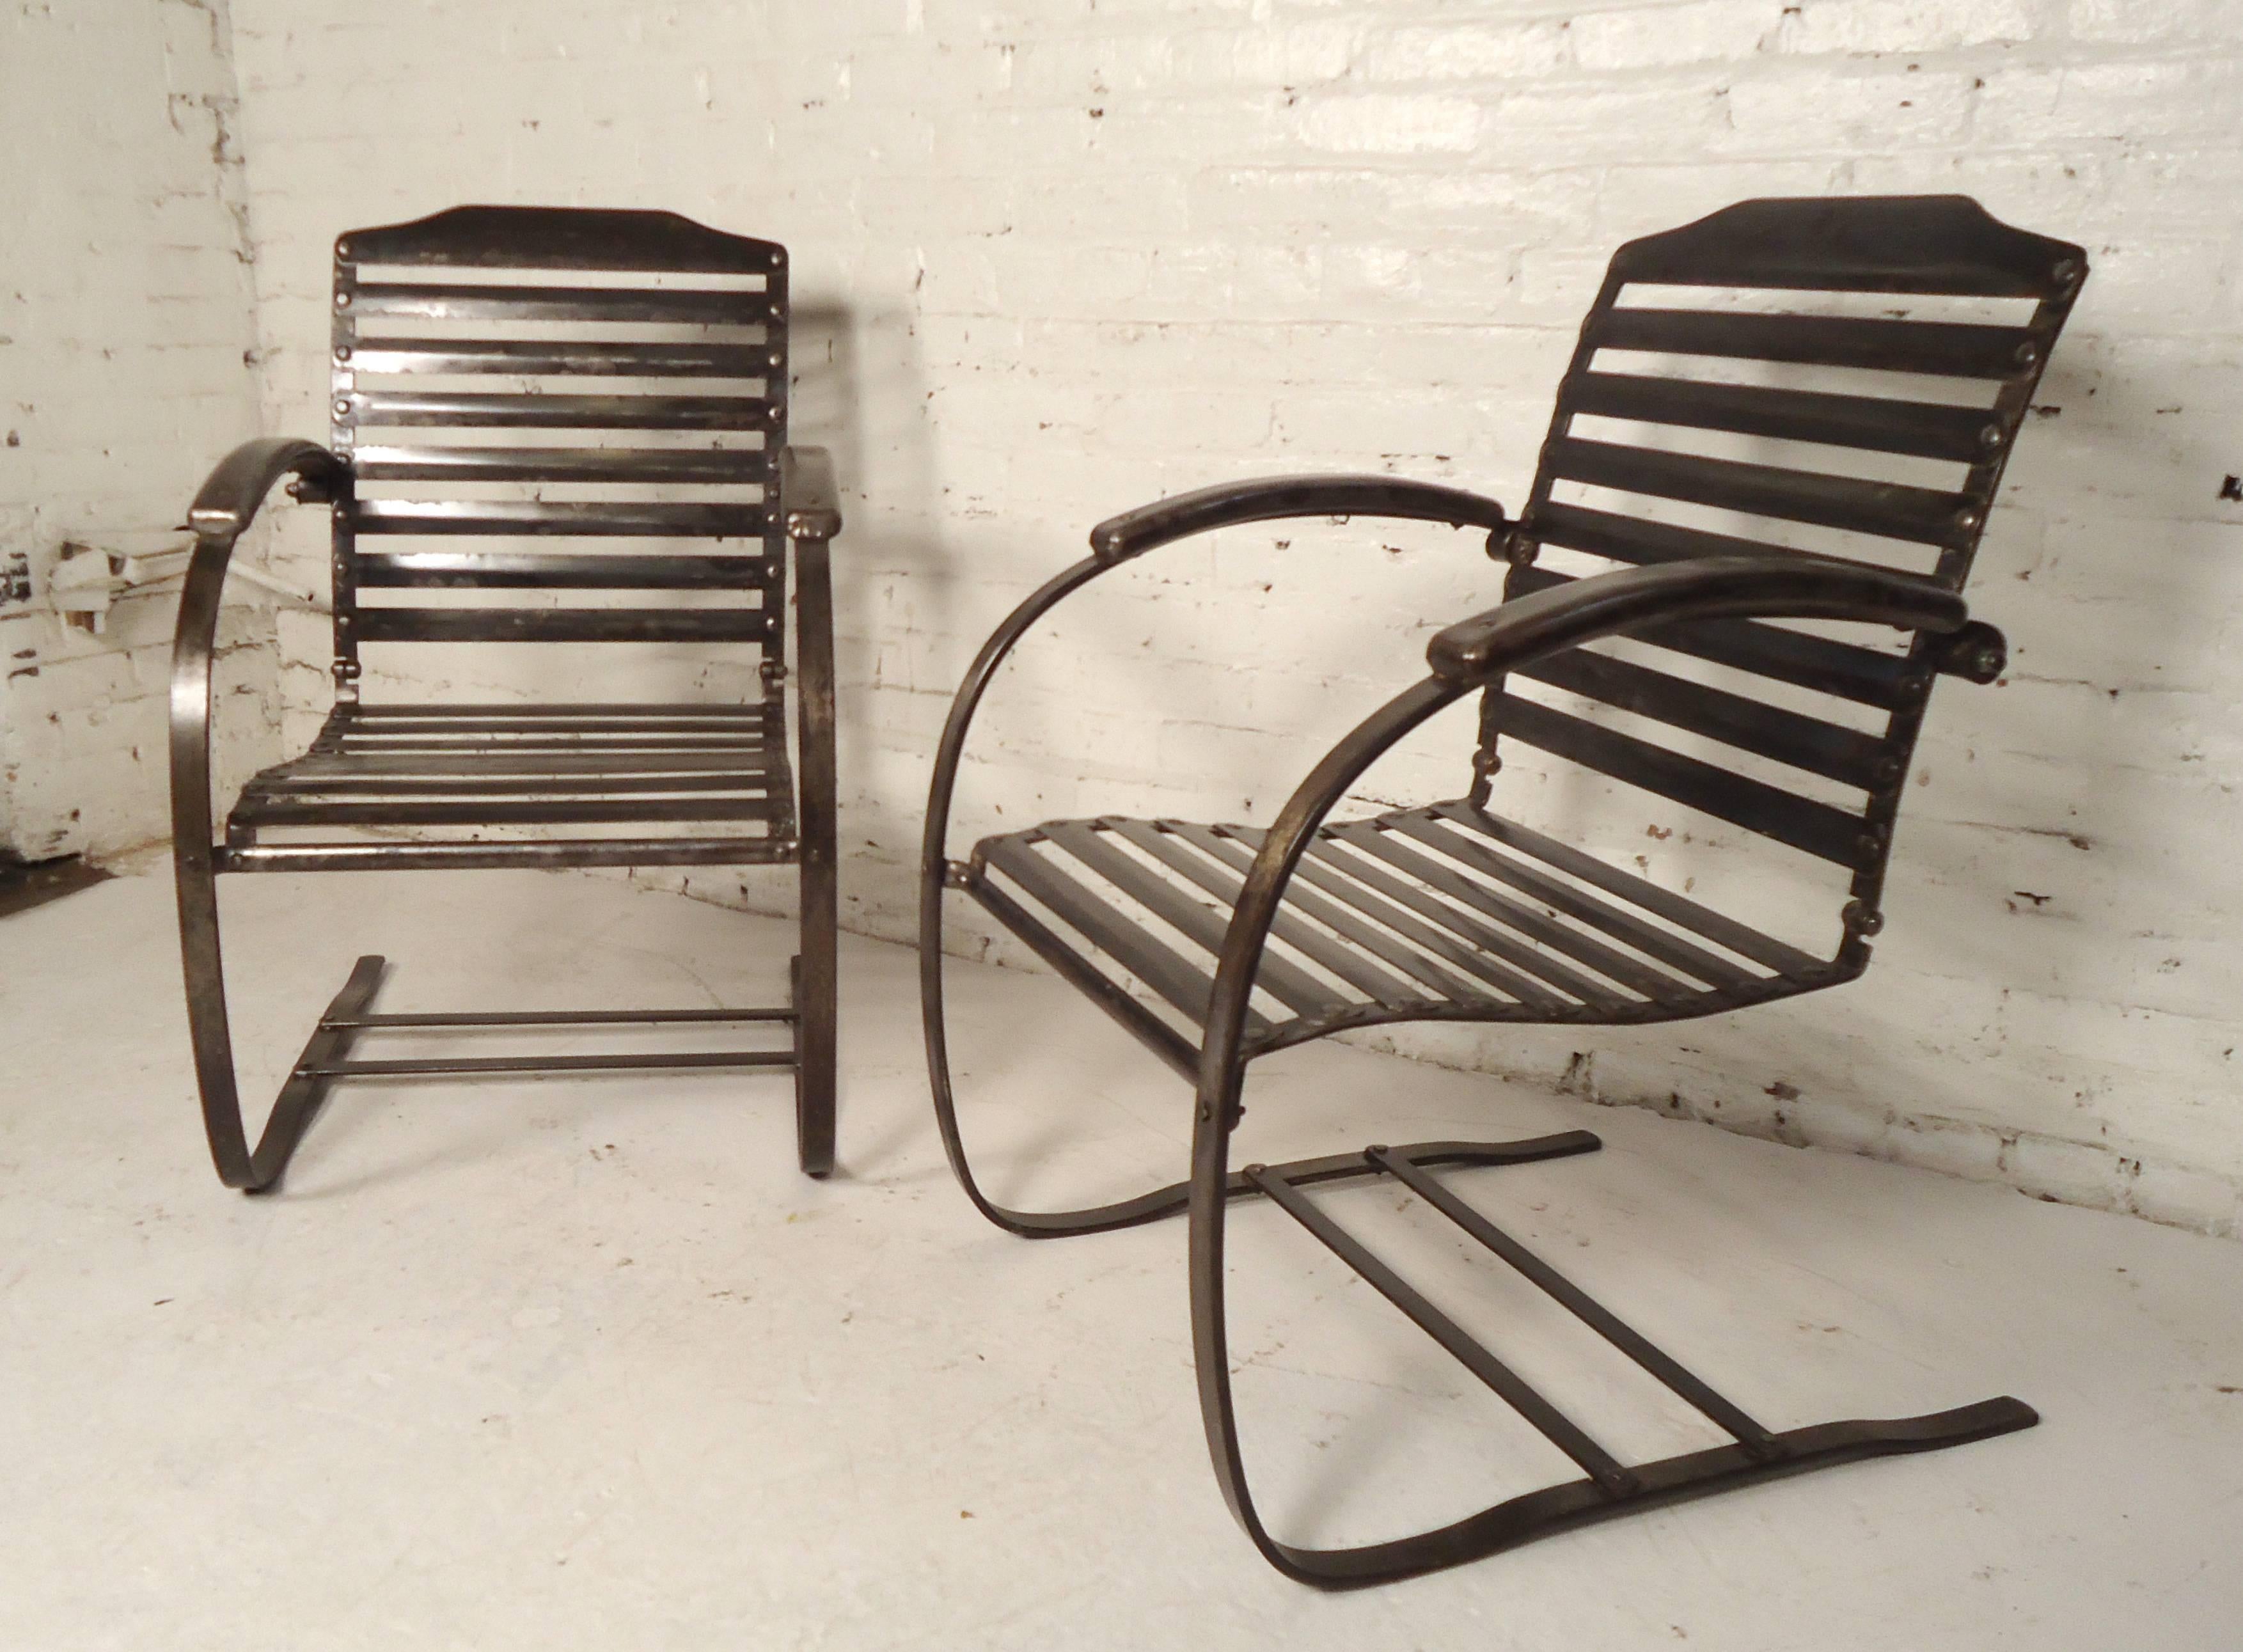 This vintage pair of patio chairs features sturdy metal construction with horizontal slat seat and back. Rounded cantilever spring style frames make a stylish impression for any home, garden or patio. 

Please confirm item location (NY or NJ).